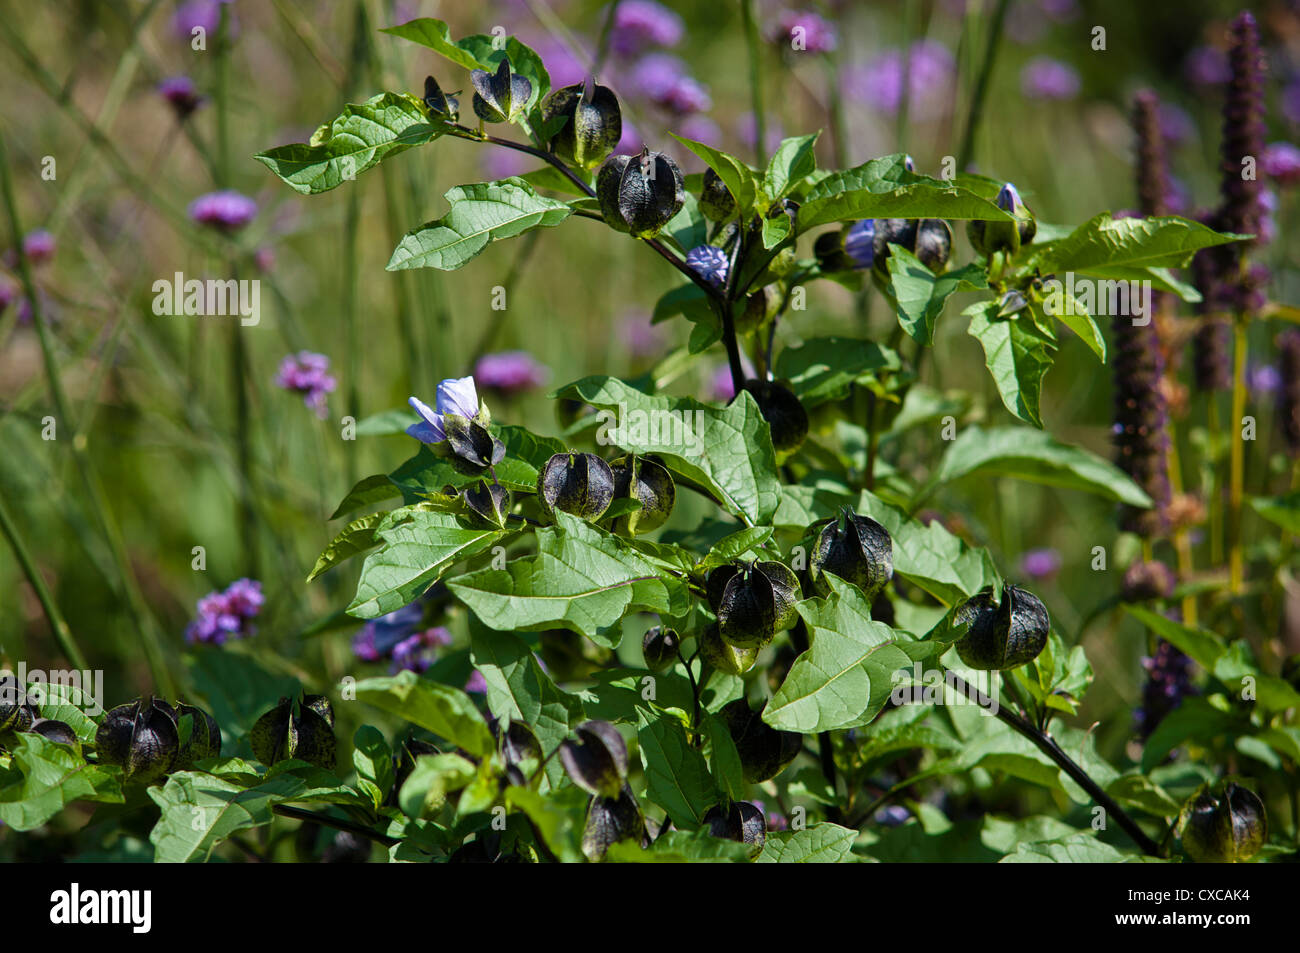 NICANDRA PHYSALODES FLOWERS WITH VERBENA BONARIENSIS IN A GARDEN SETTING Stock Photo